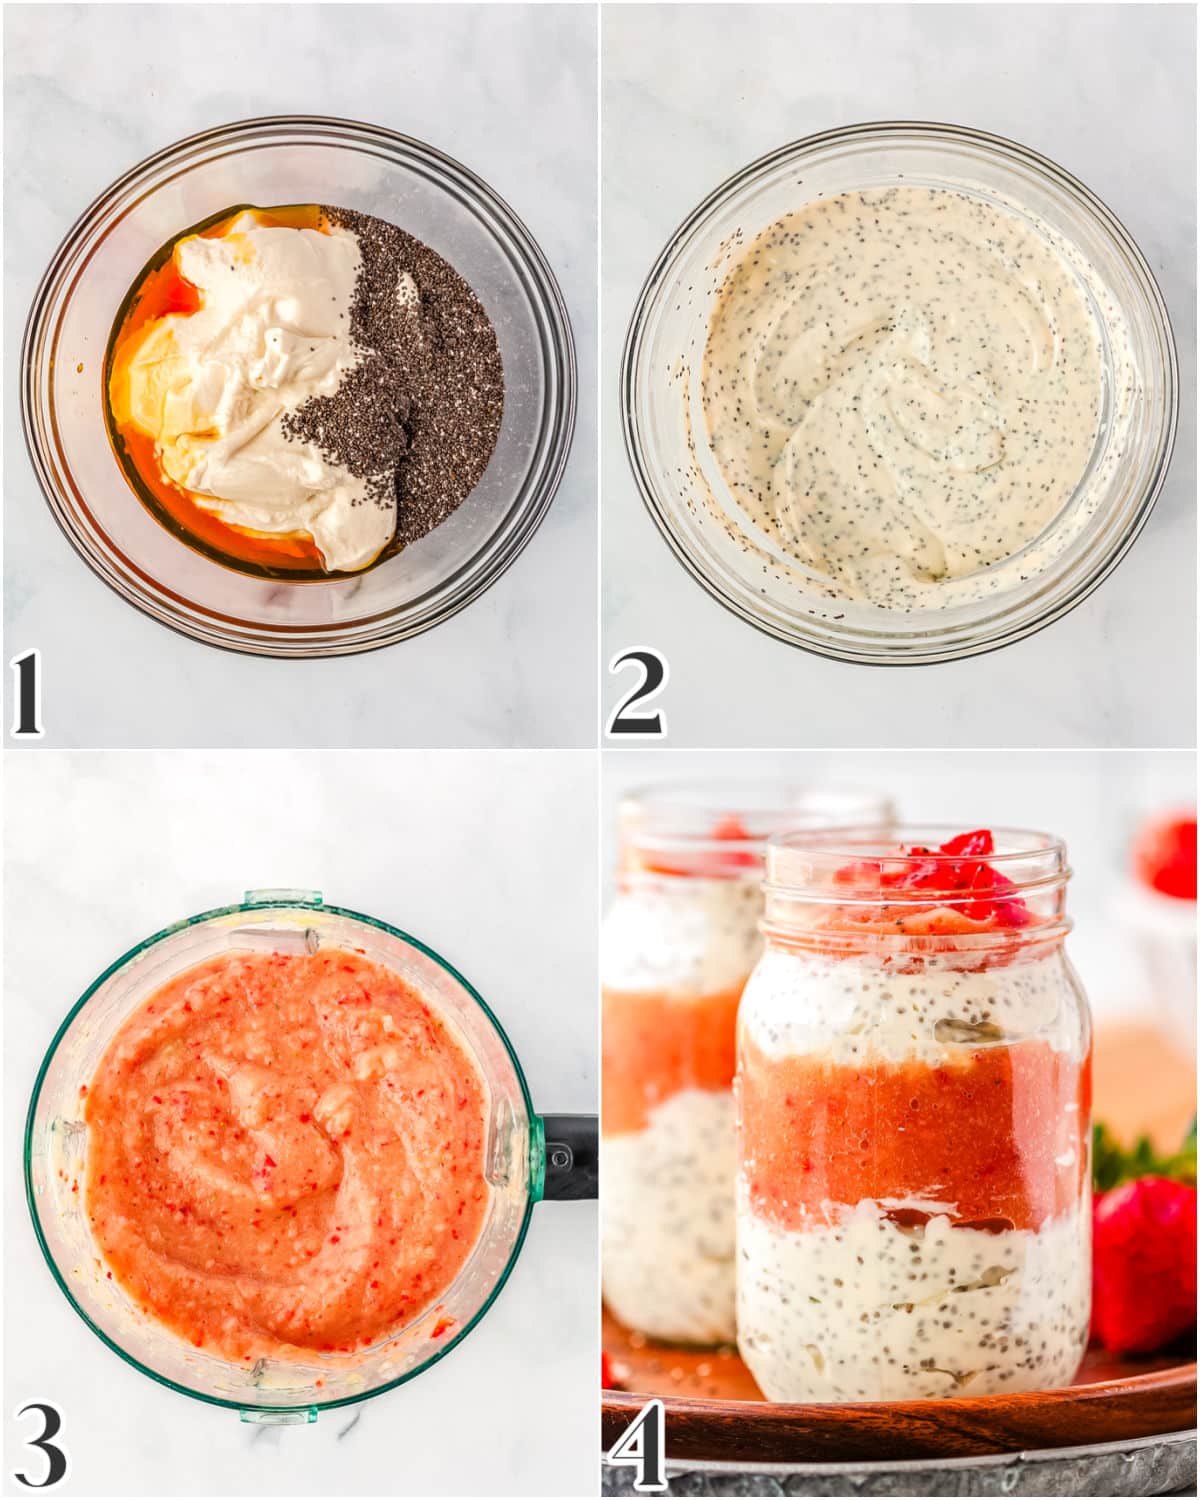 This is a picture collage showing how to make the recipe, from mixing the Greek yogurt and chia seeds together to assembling the parfaits.